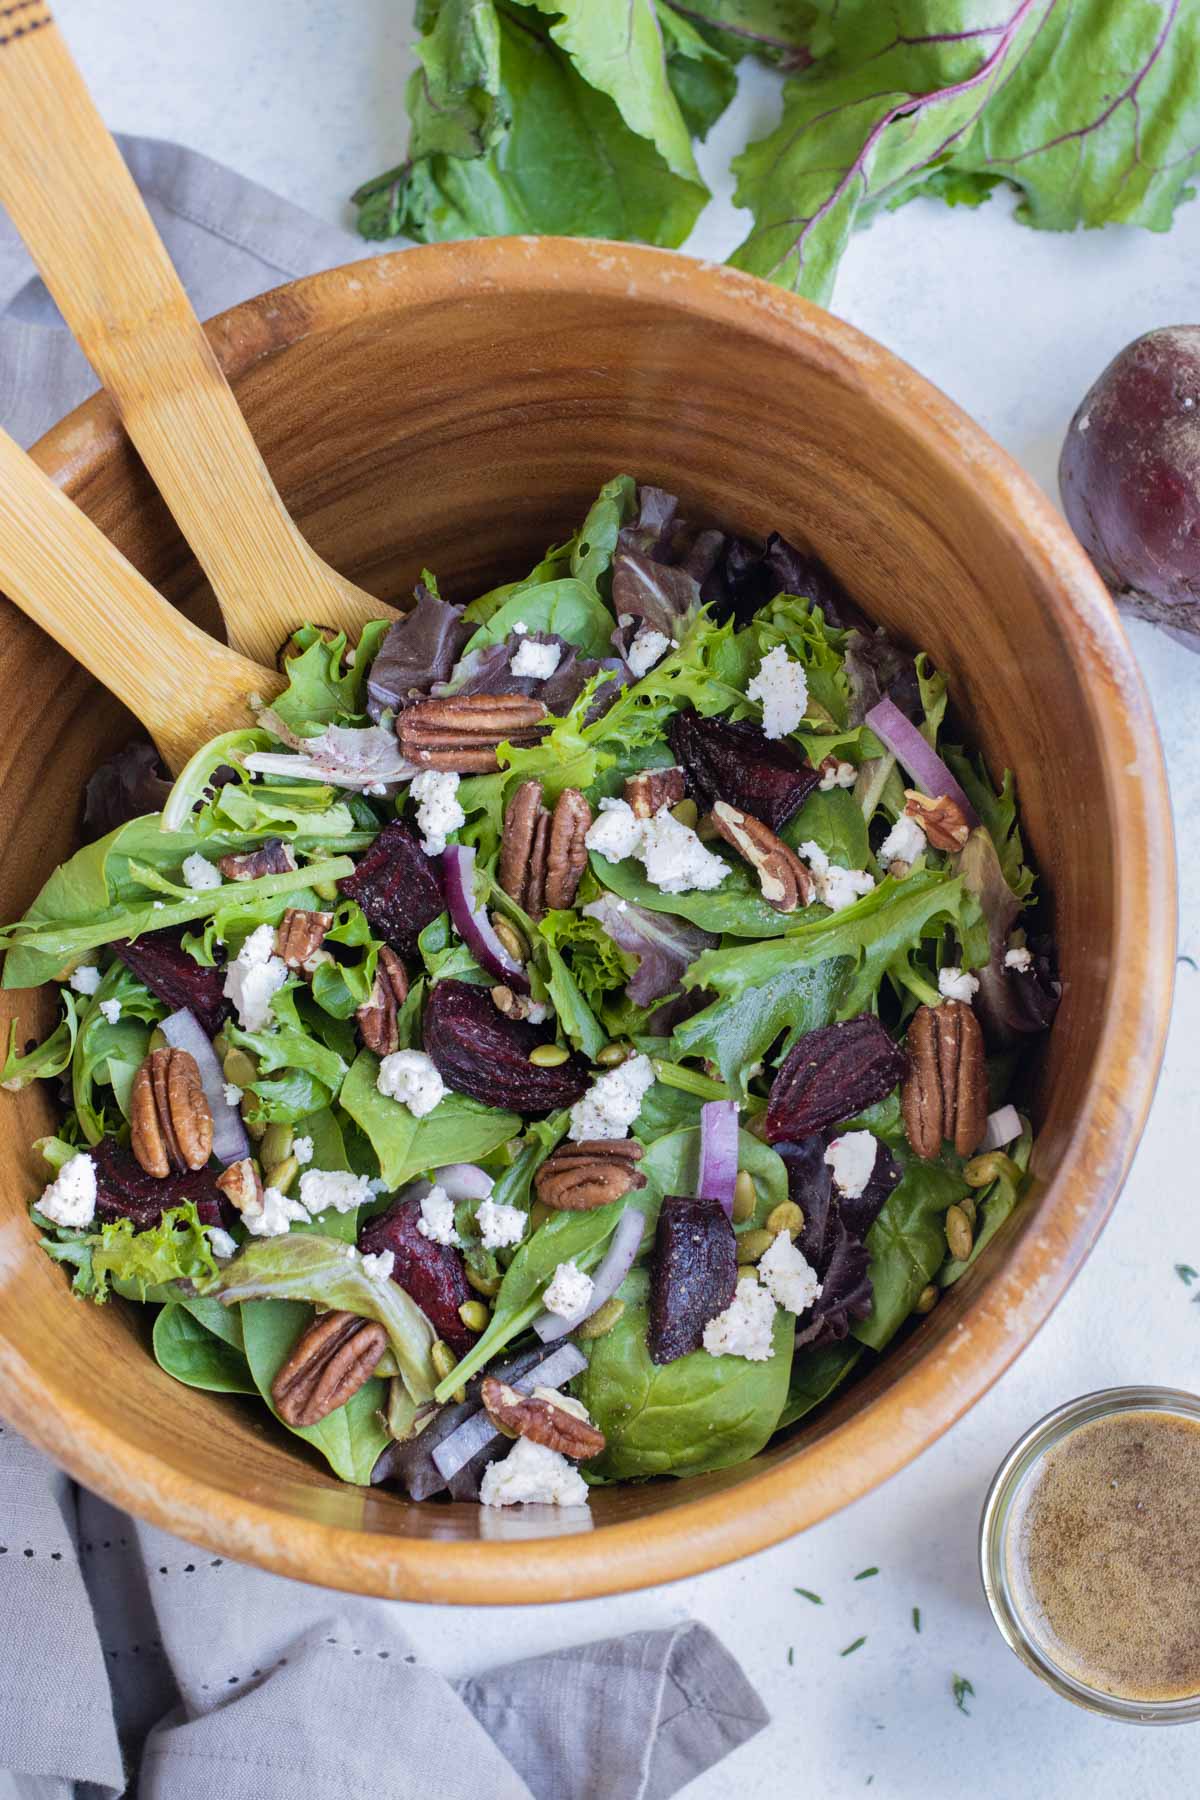 Roasted beet and goat cheese salad is served from a large bowl.